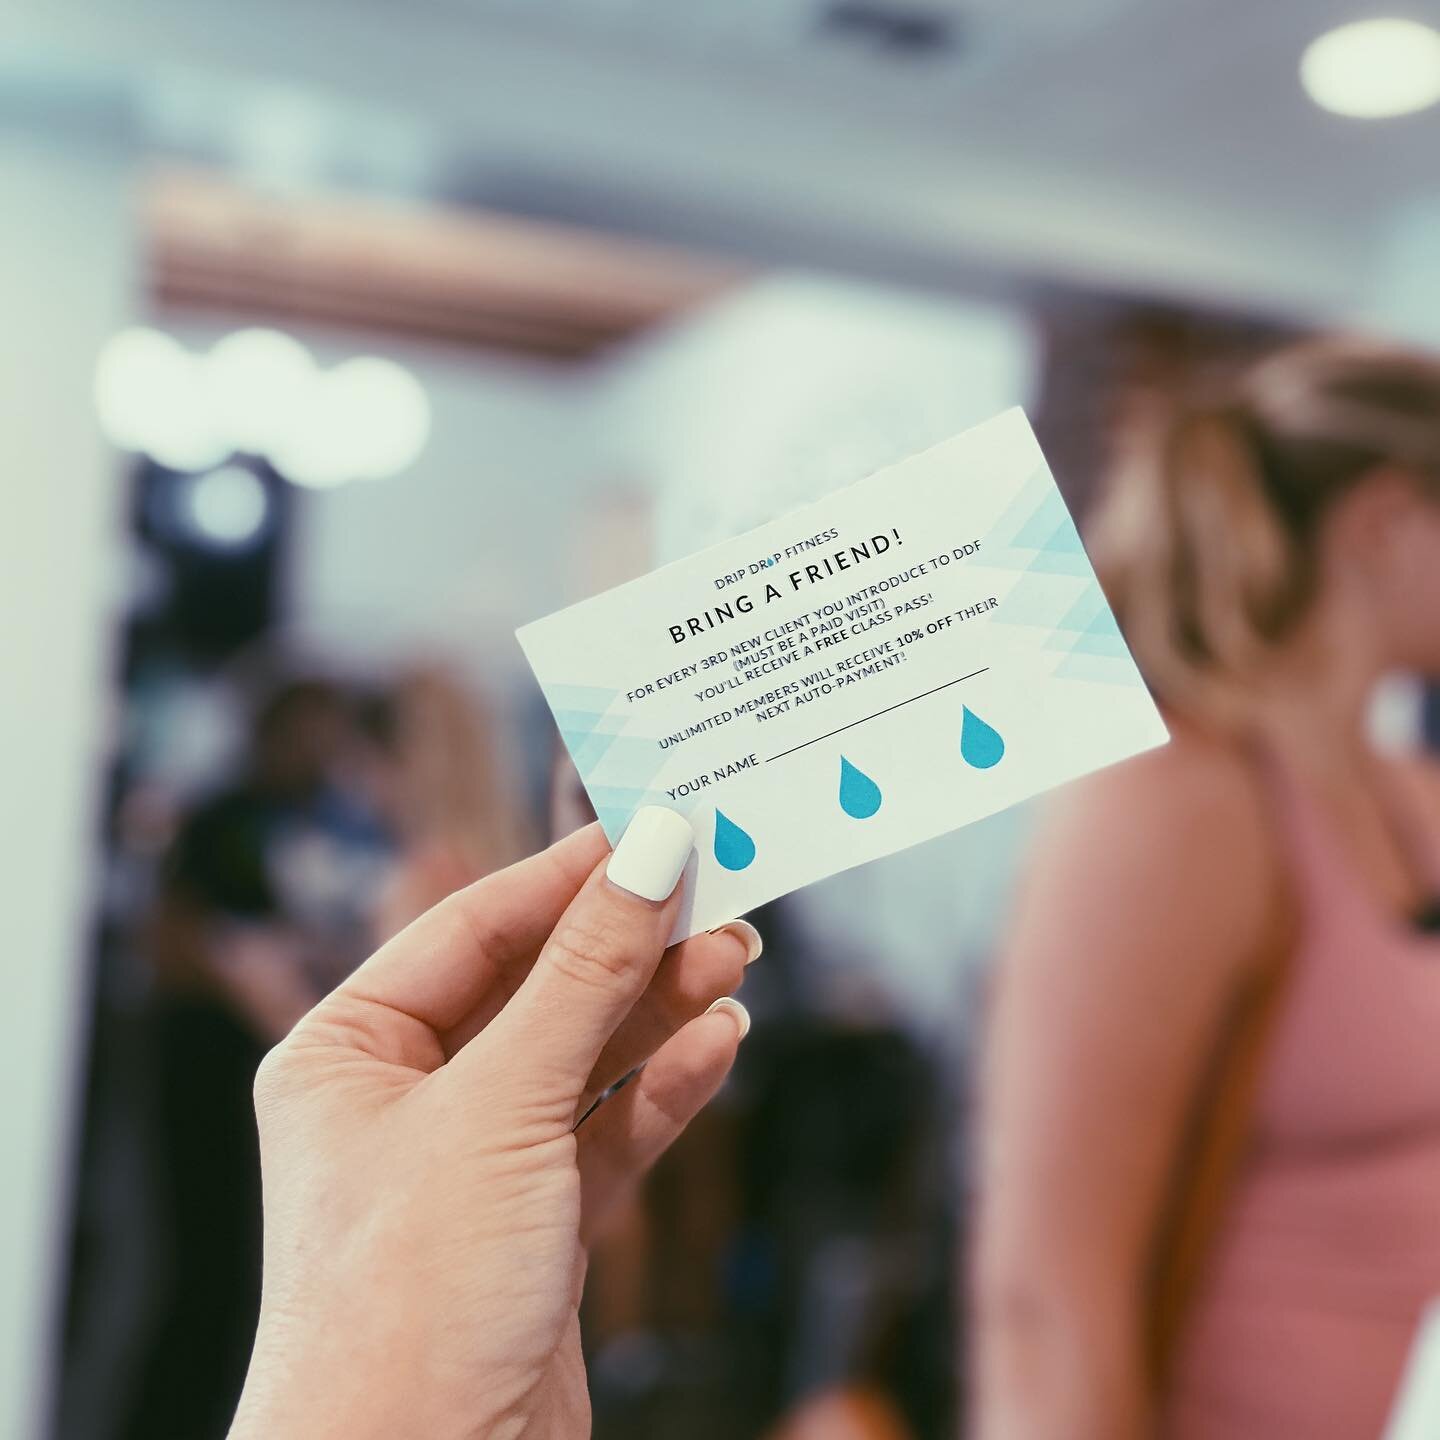 We want to THANK YOU for sharing the DDF love with your circles! 💙 Next time you're at the studio, pick up a referral card! Each time you bring a new paying guest/friend you'll get a stamp on your card towards 1 free class or 10% off your next autop